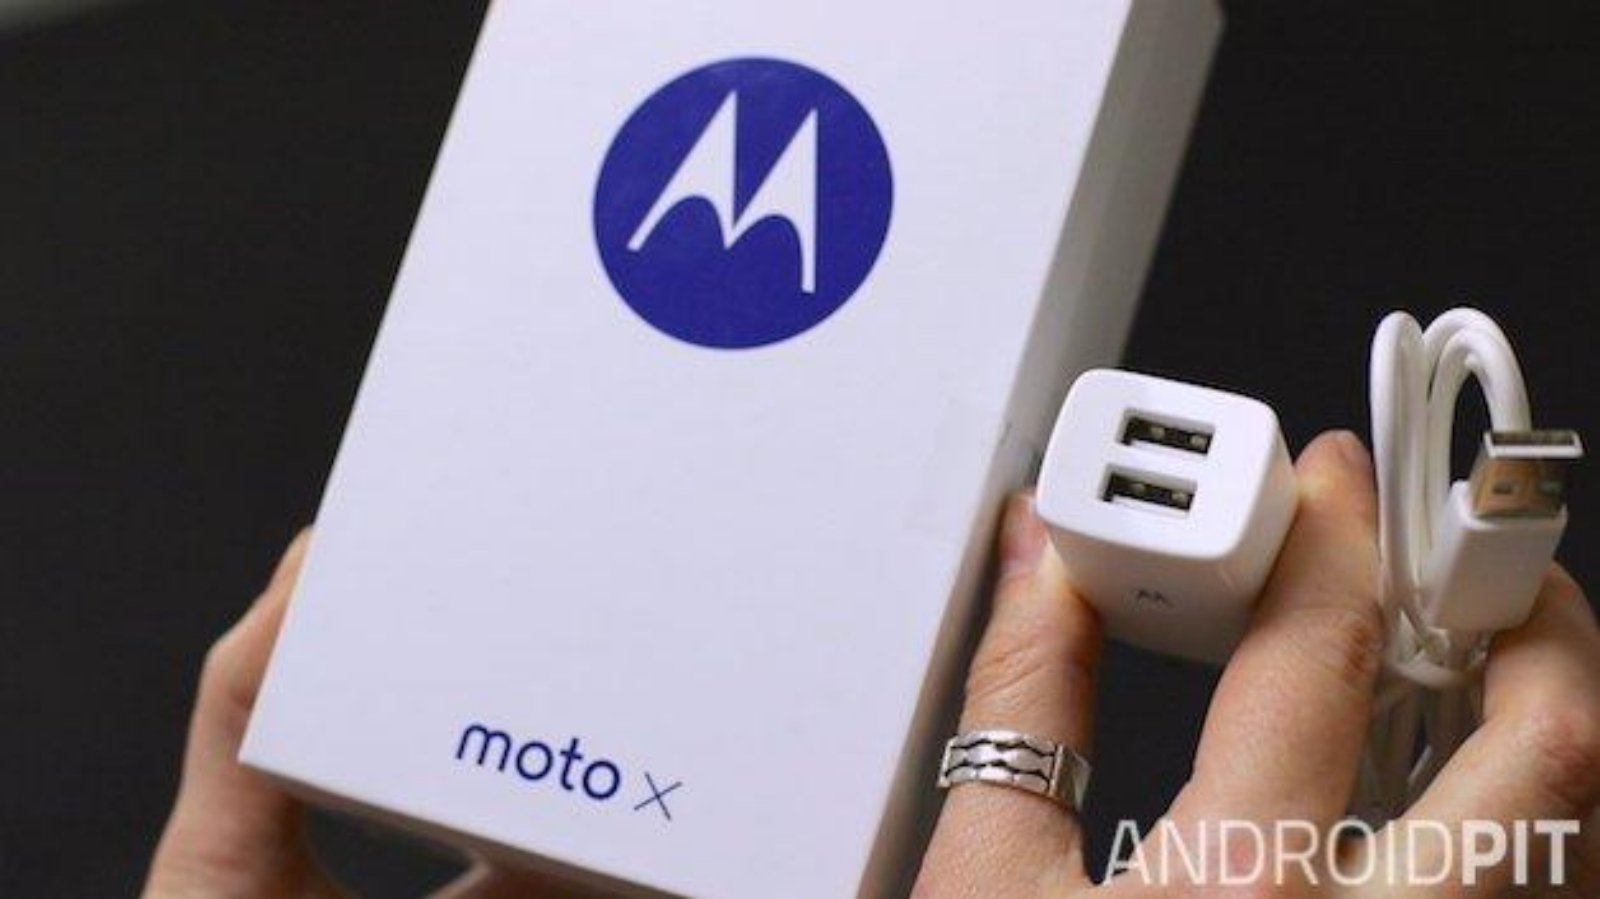 Motorola is selling the Moto Maxx Turbo Charger for $ 25